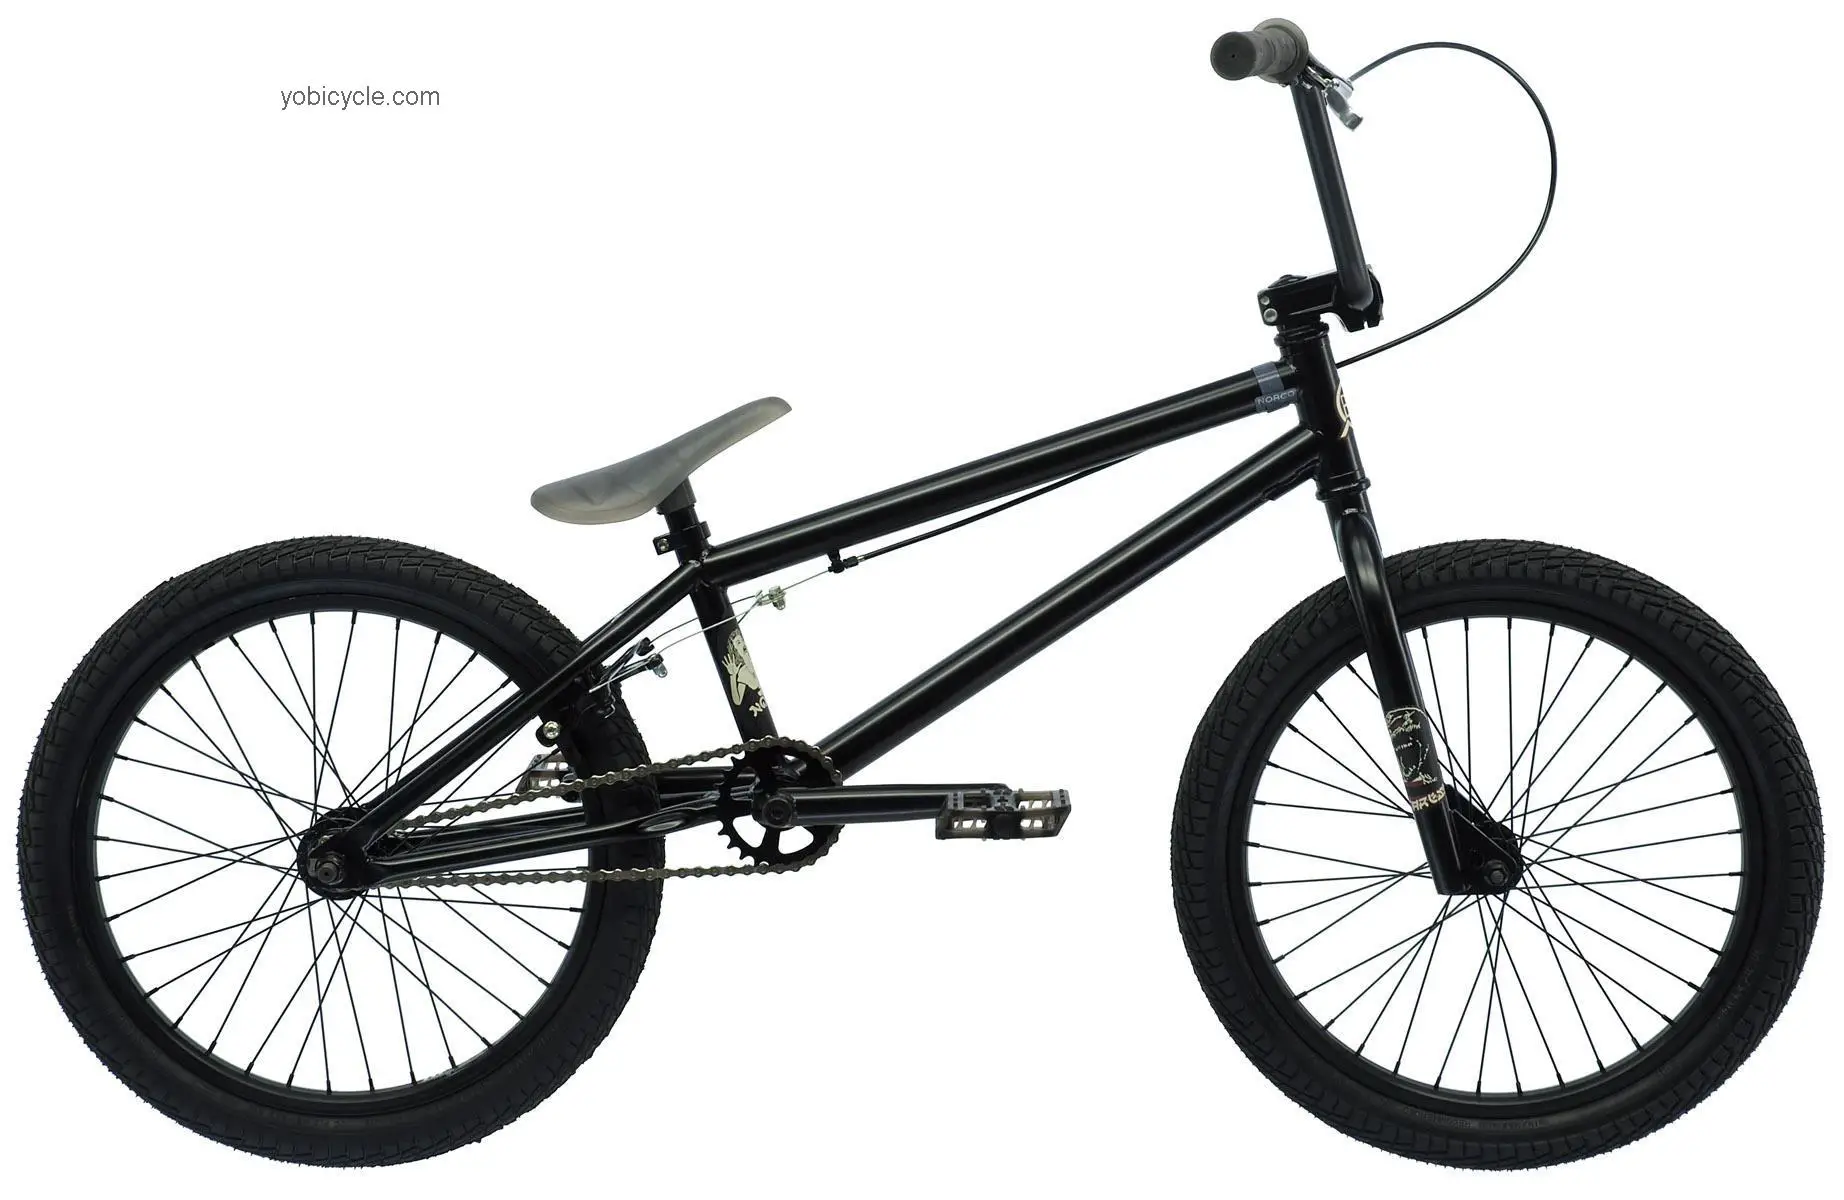 Norco Ares 20 2011 comparison online with competitors